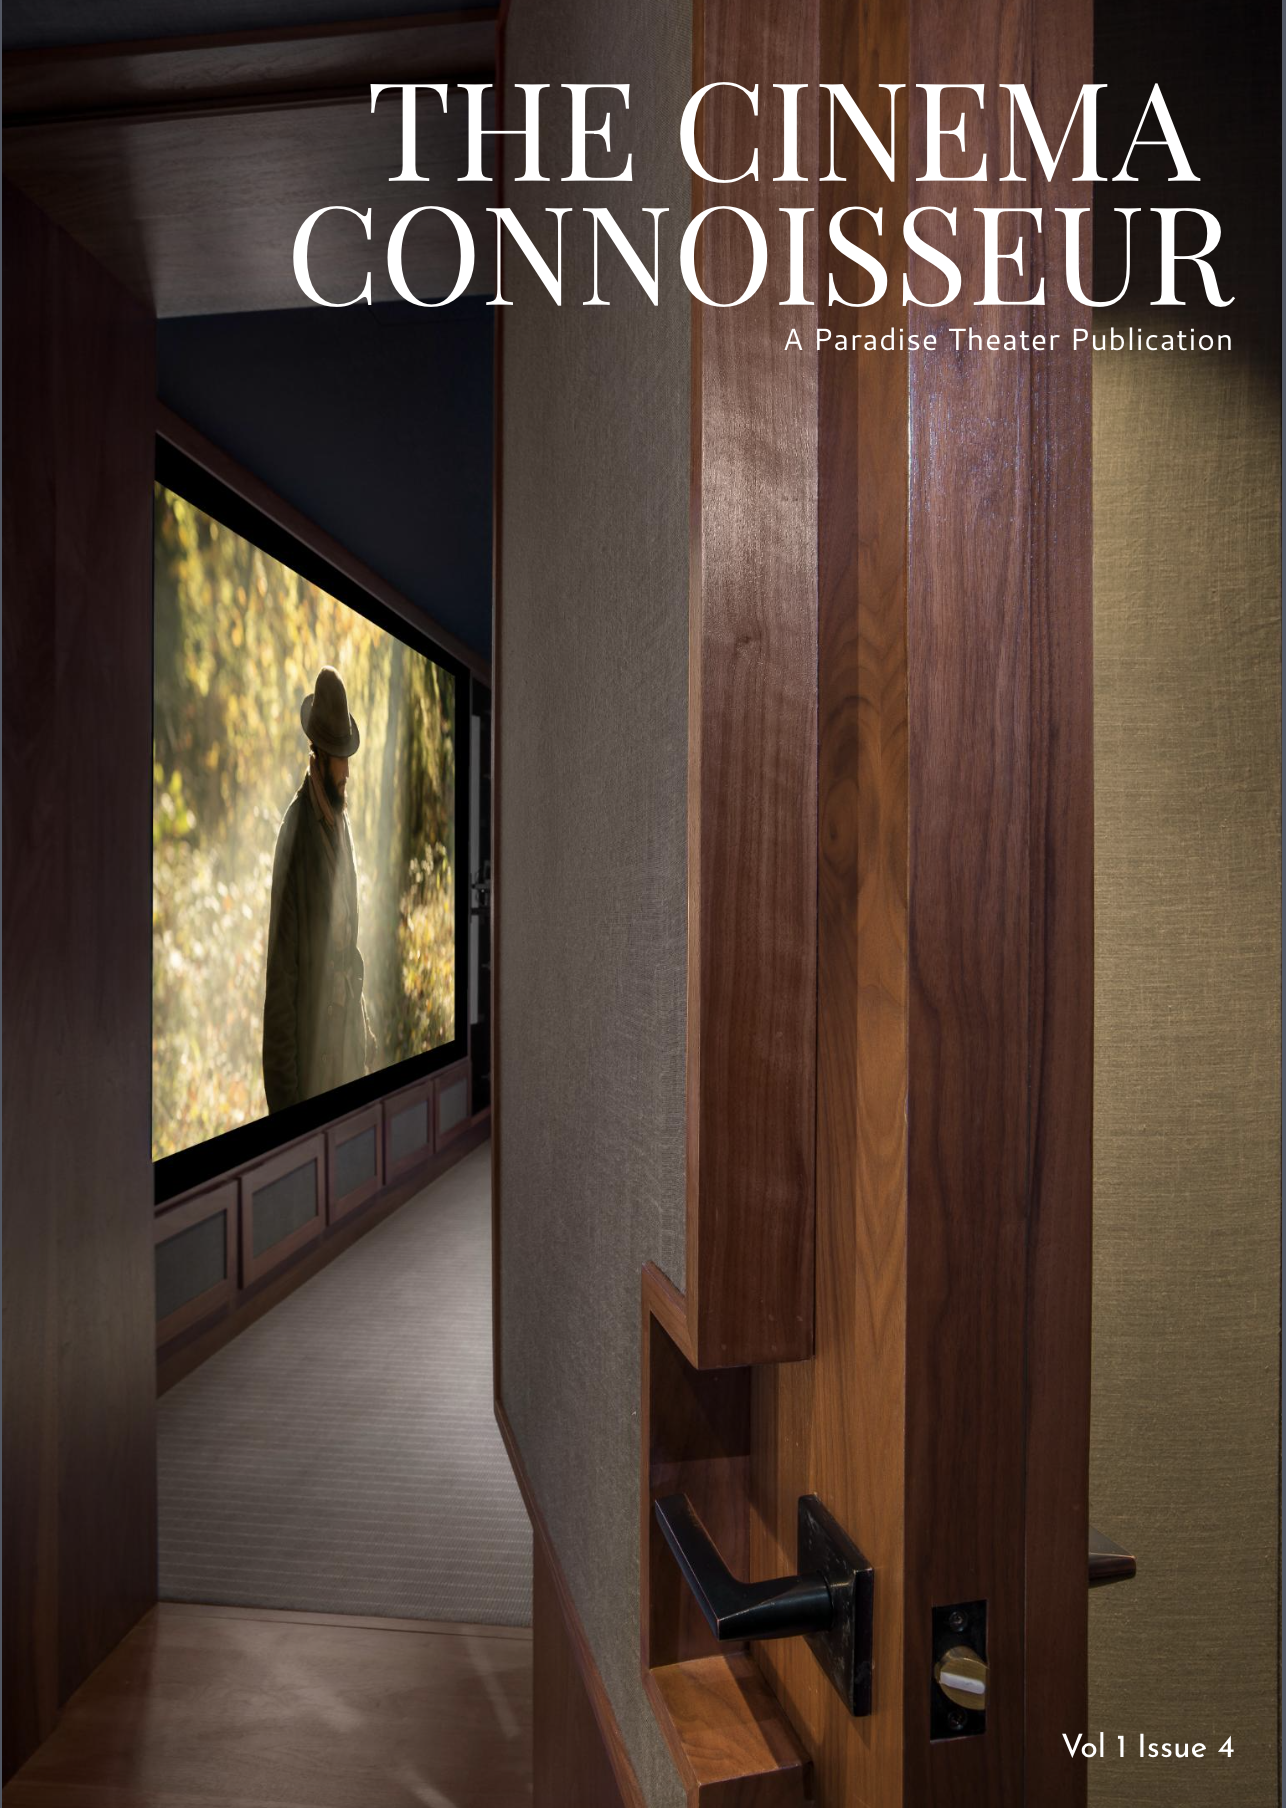 The Cinema Connoisseur Releases Issue 4